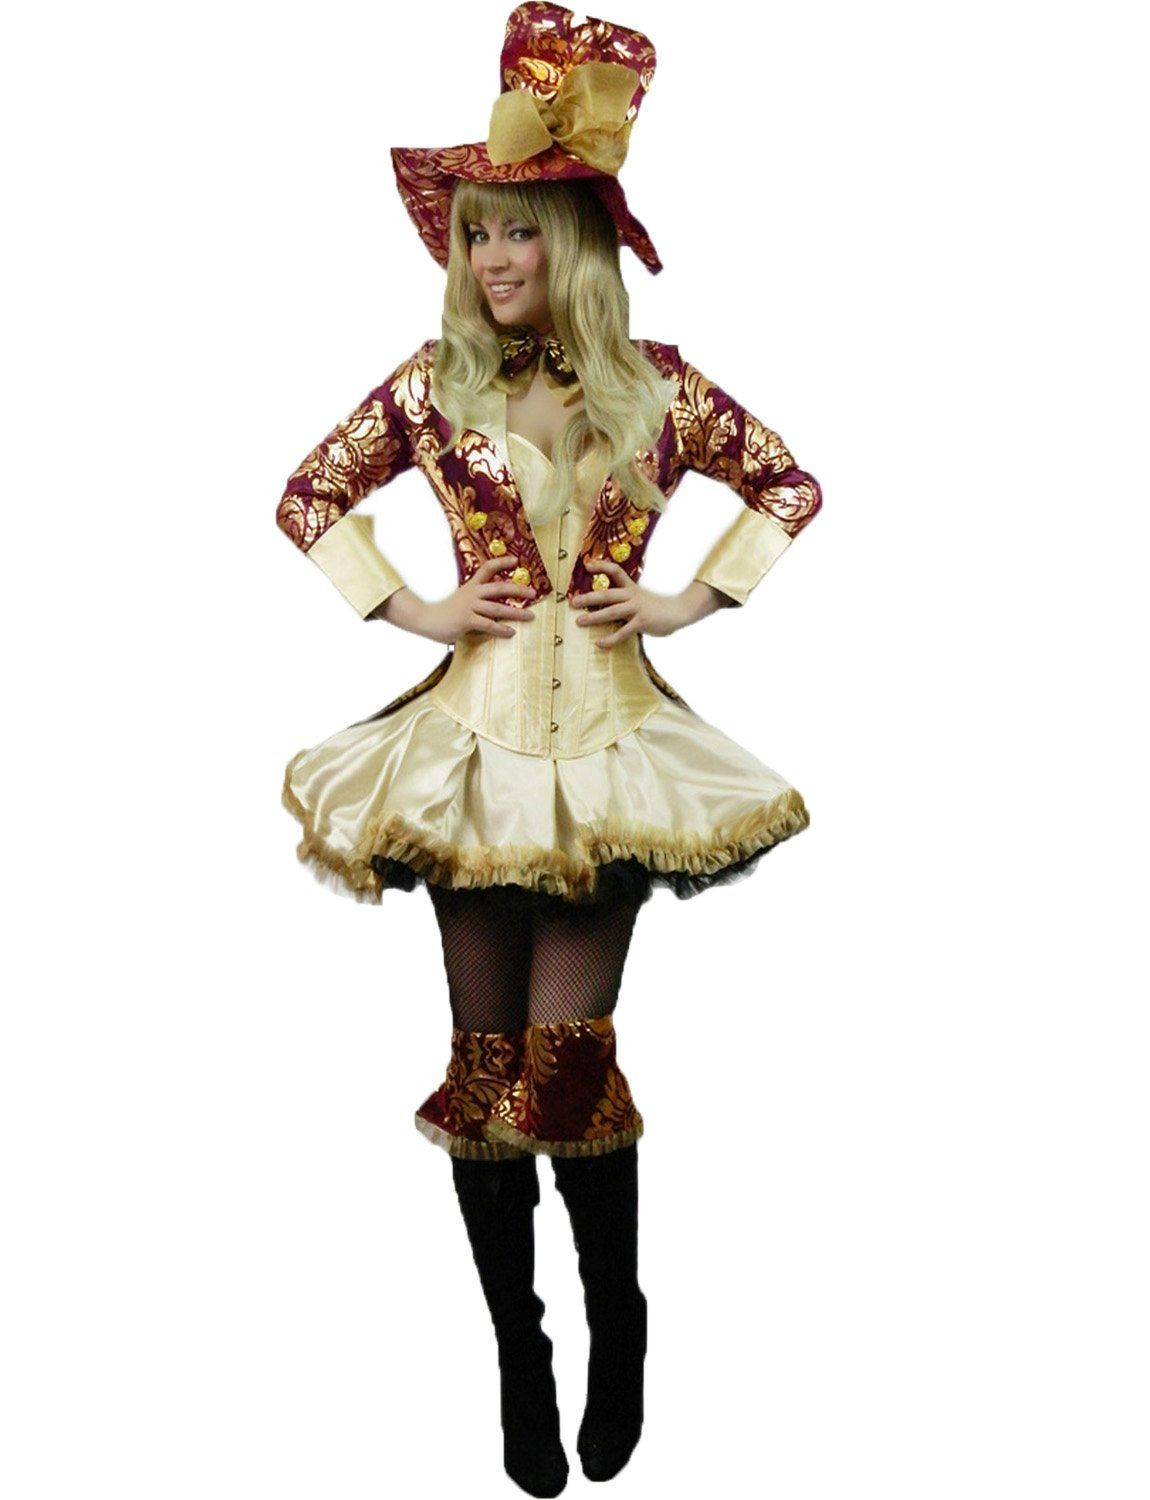 Mad Hatter Tea Party Costume Ideas
 Yummy Bee Mad Hatter Tea Party Hostess Costume Womens